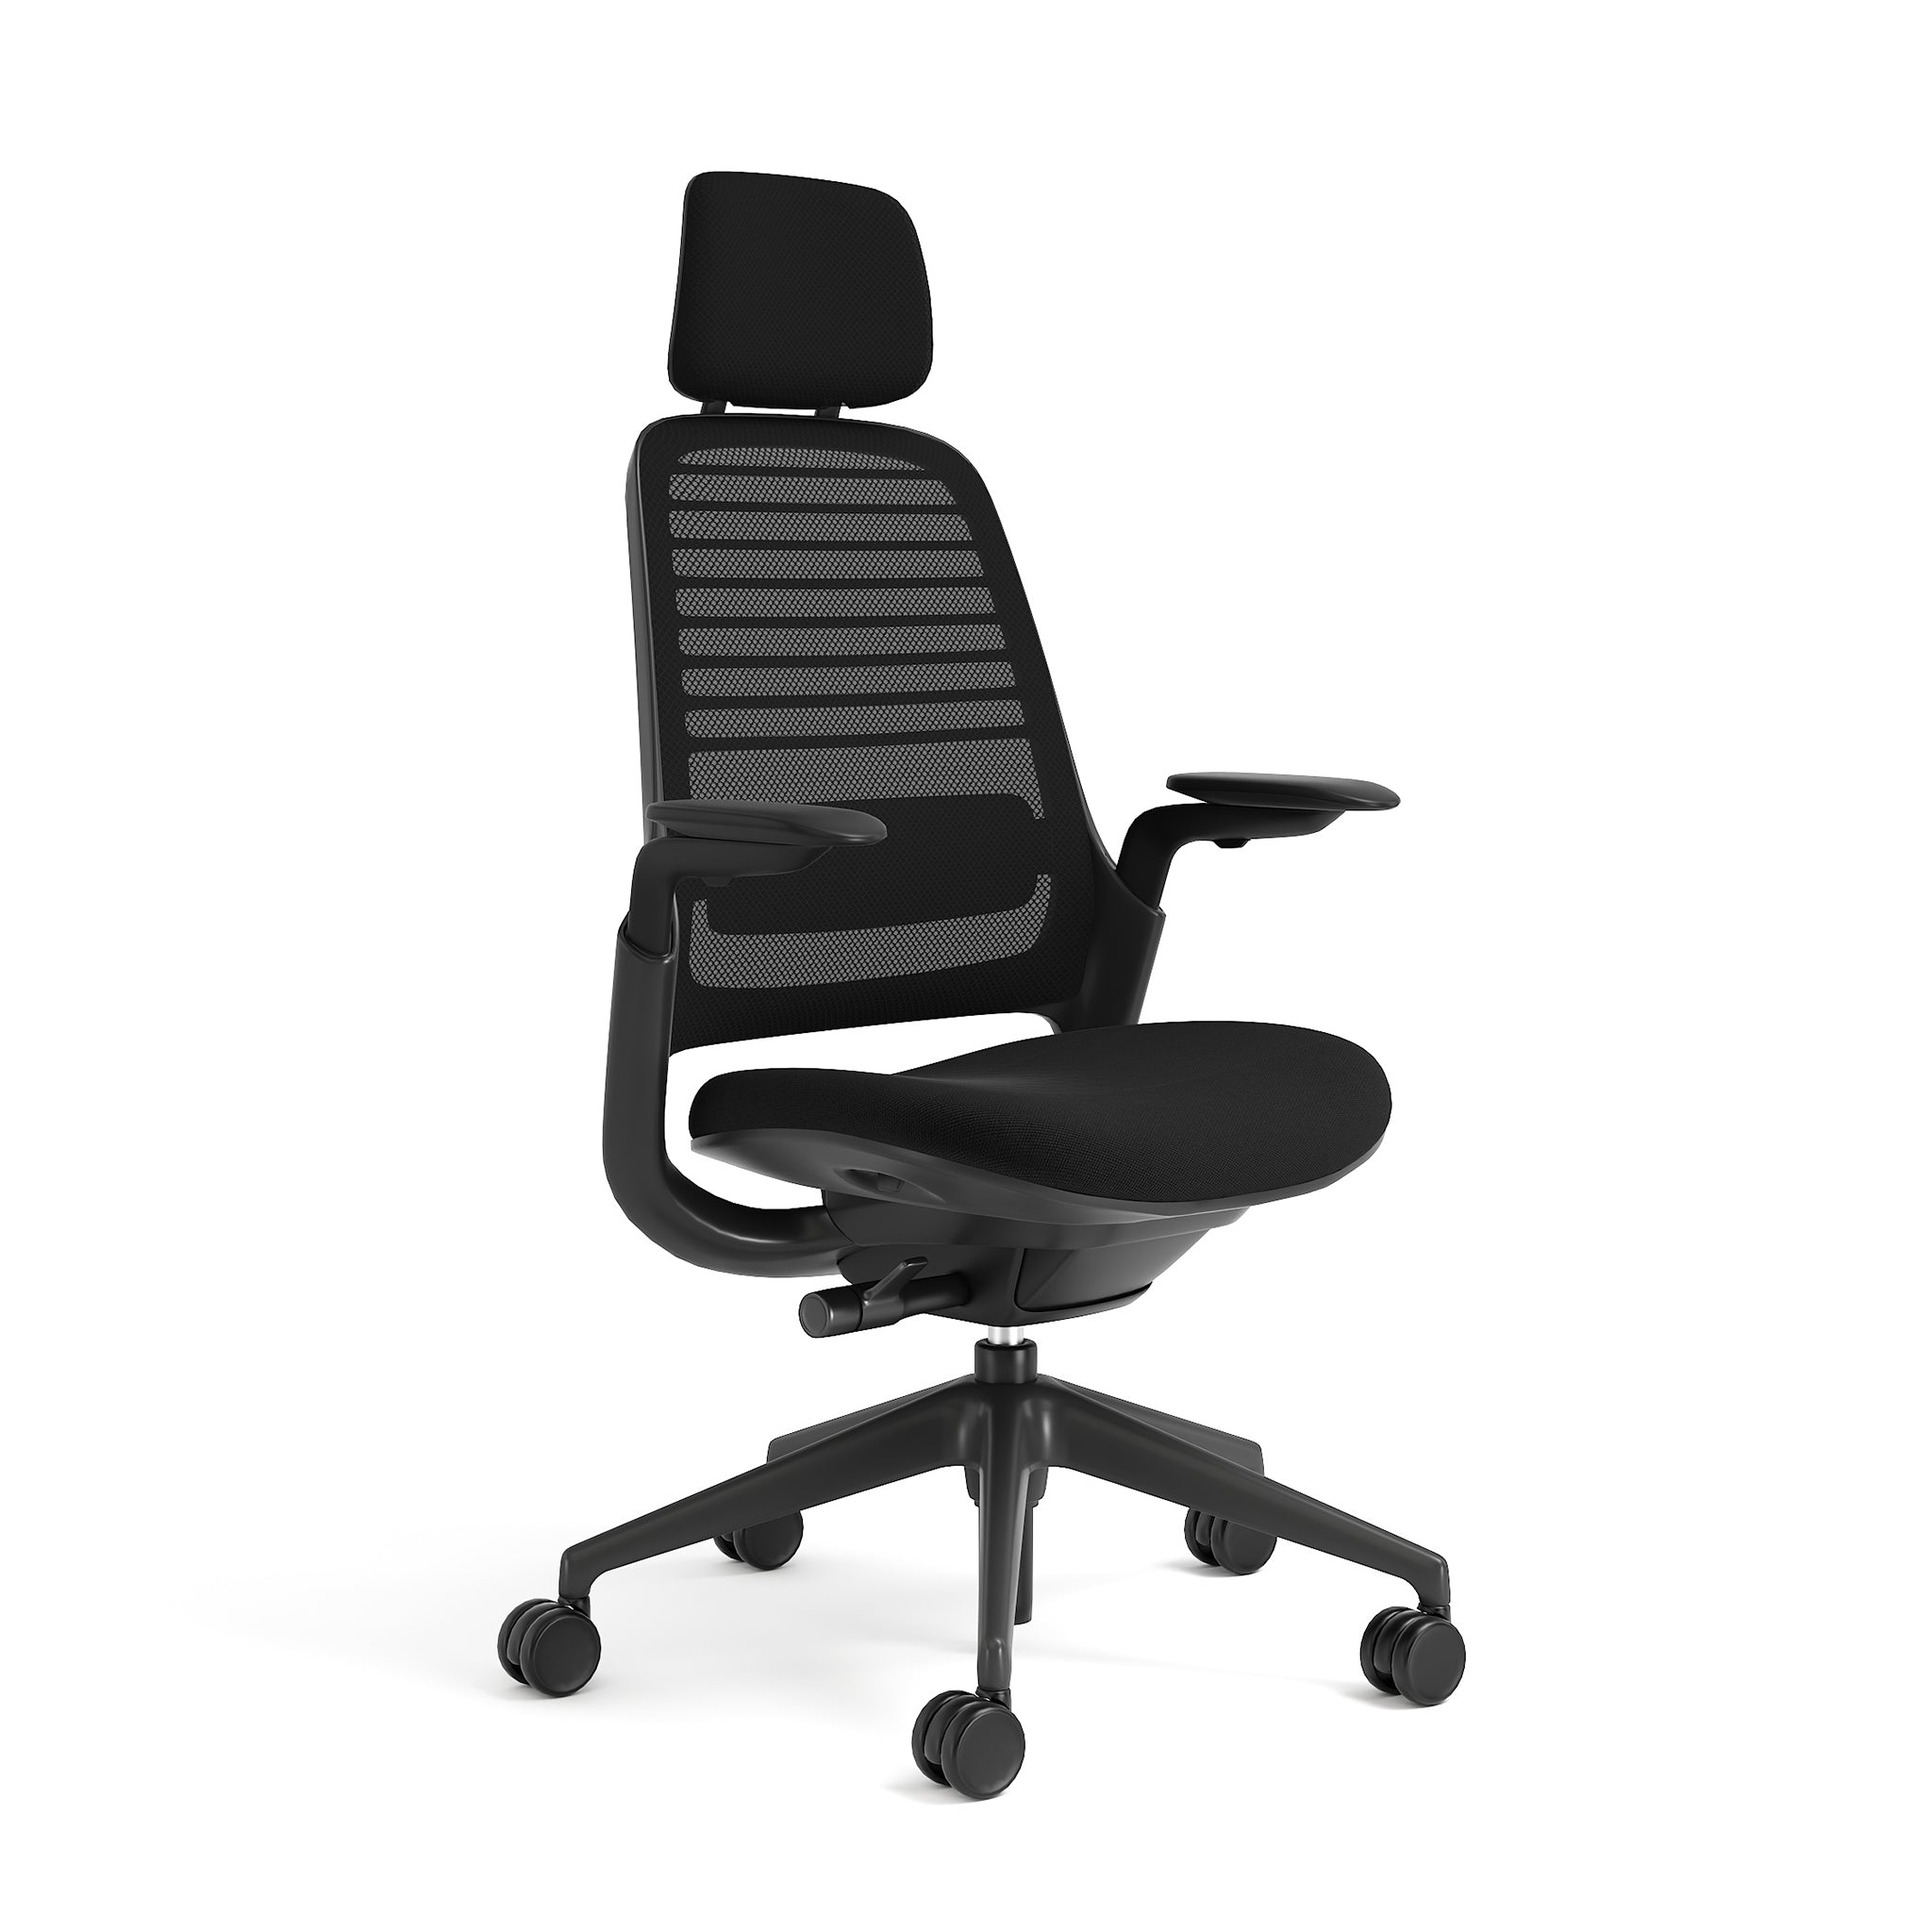 Meshback 3D Microknit Licorice; Seat fabric Cogent Connect Licorice; Frame Black